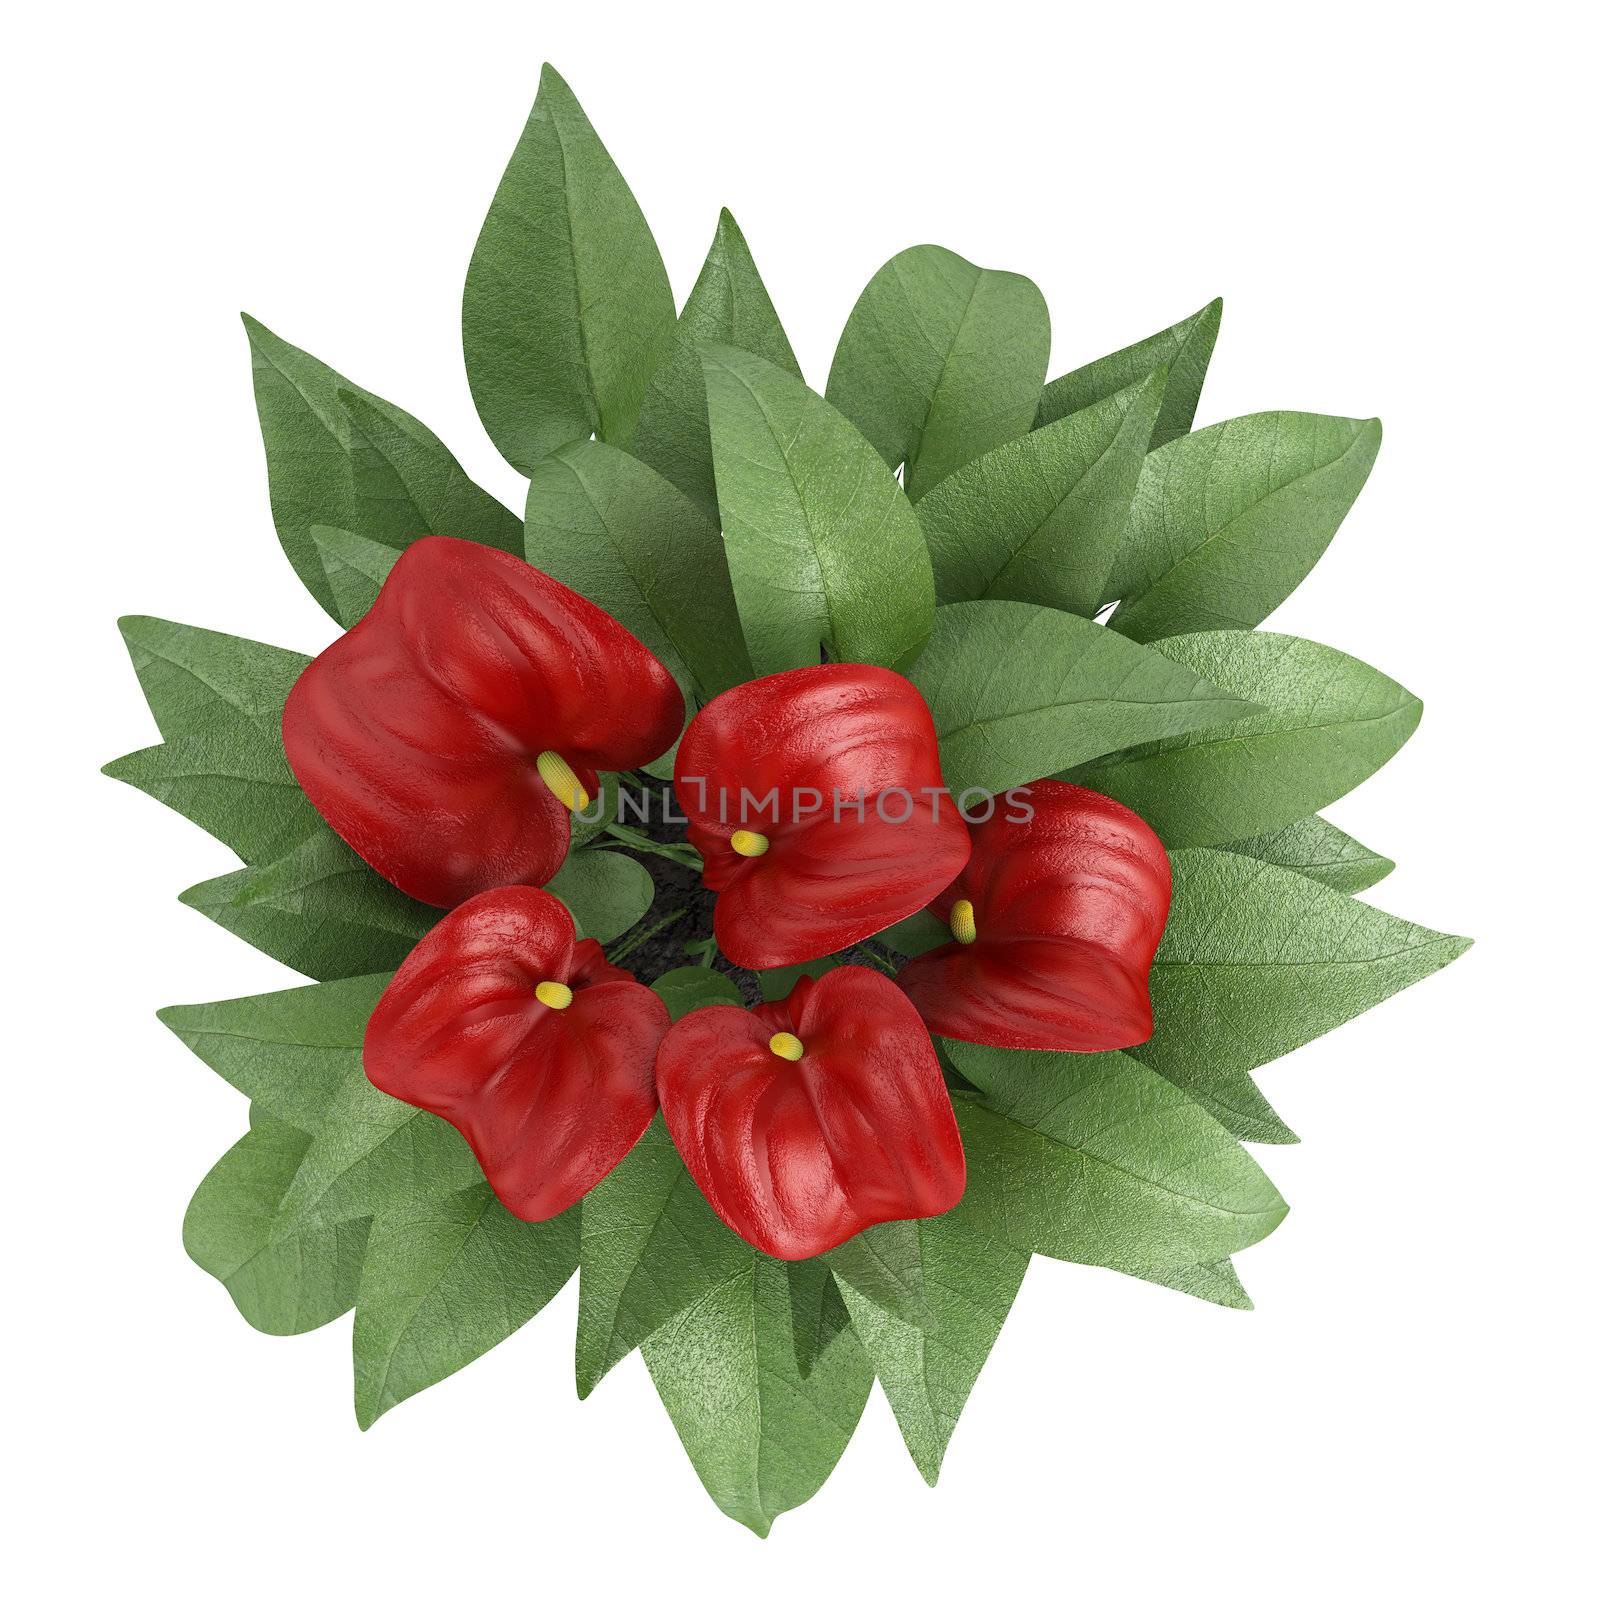 Anthurium flowers with a deep red spathe blooming on an indoor pot plant isolated on white